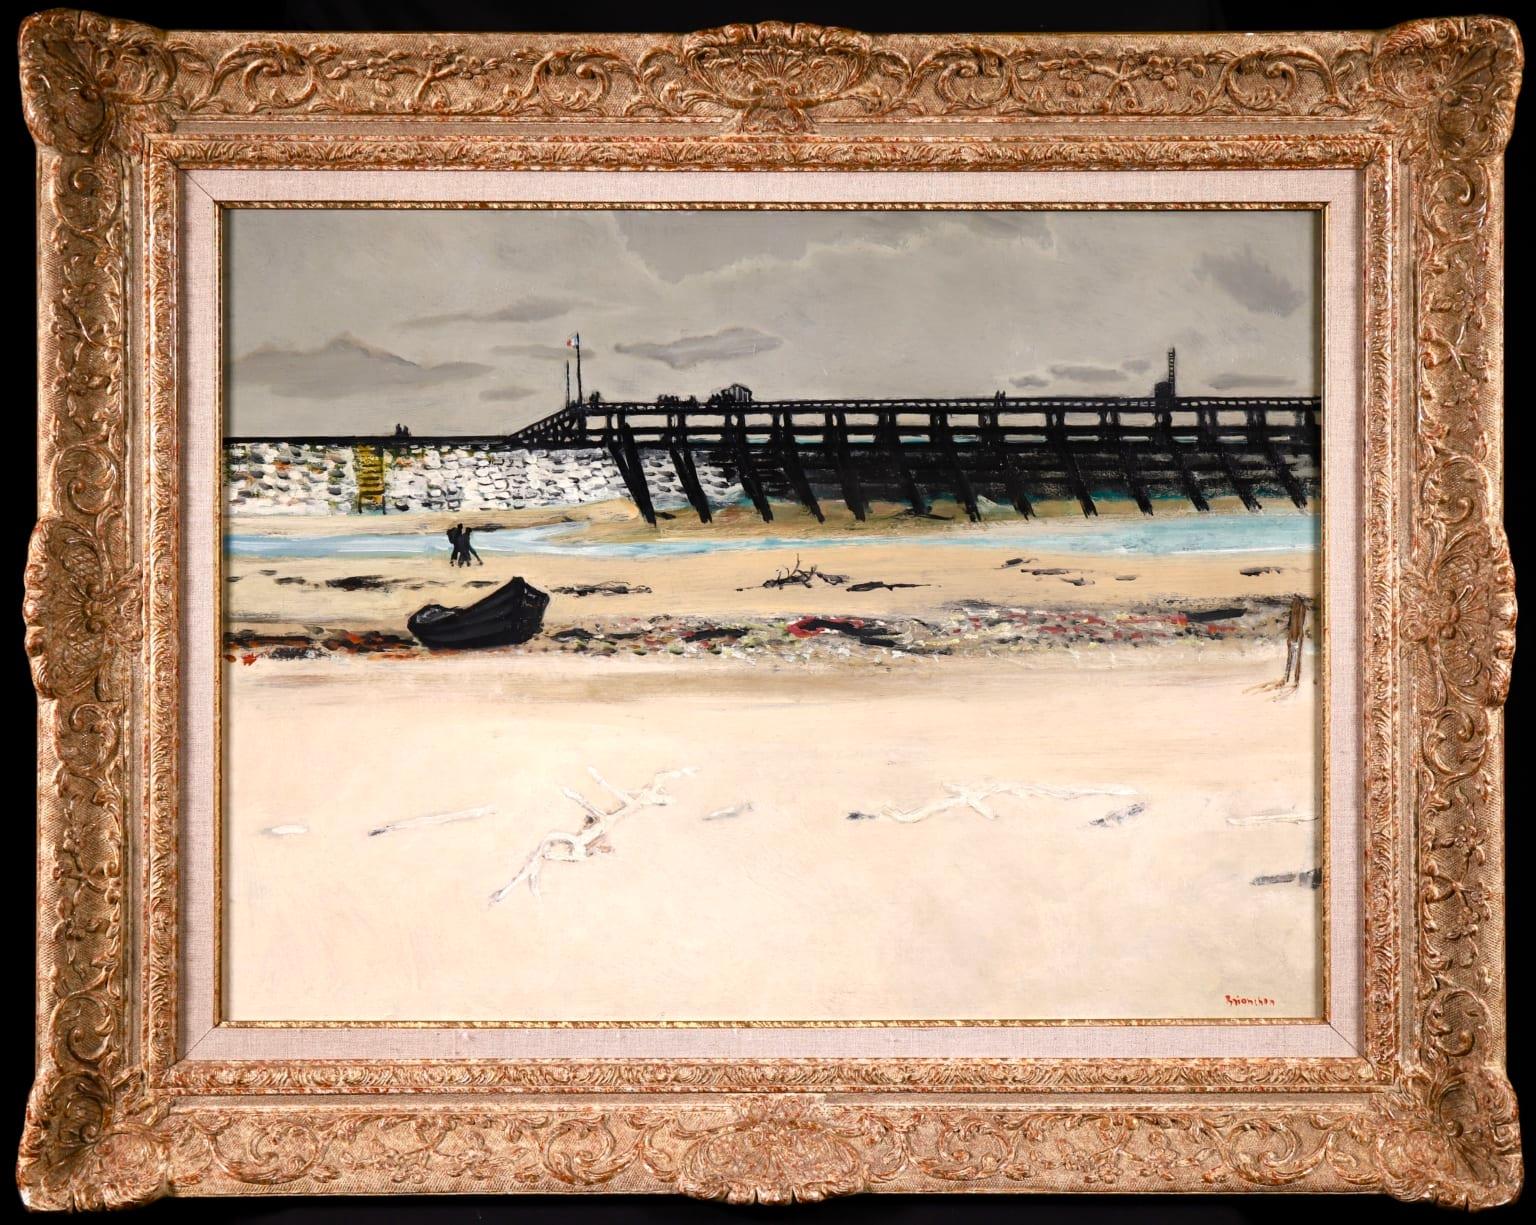 Signed oil on canvas coastal landscape by French modern painter Maurice Brianchon who was known as one of the Painters of Poetic Reality. This simple and charming piece depicts a view of the beach at Soorts-Hossegor on a grey day. The figures of two